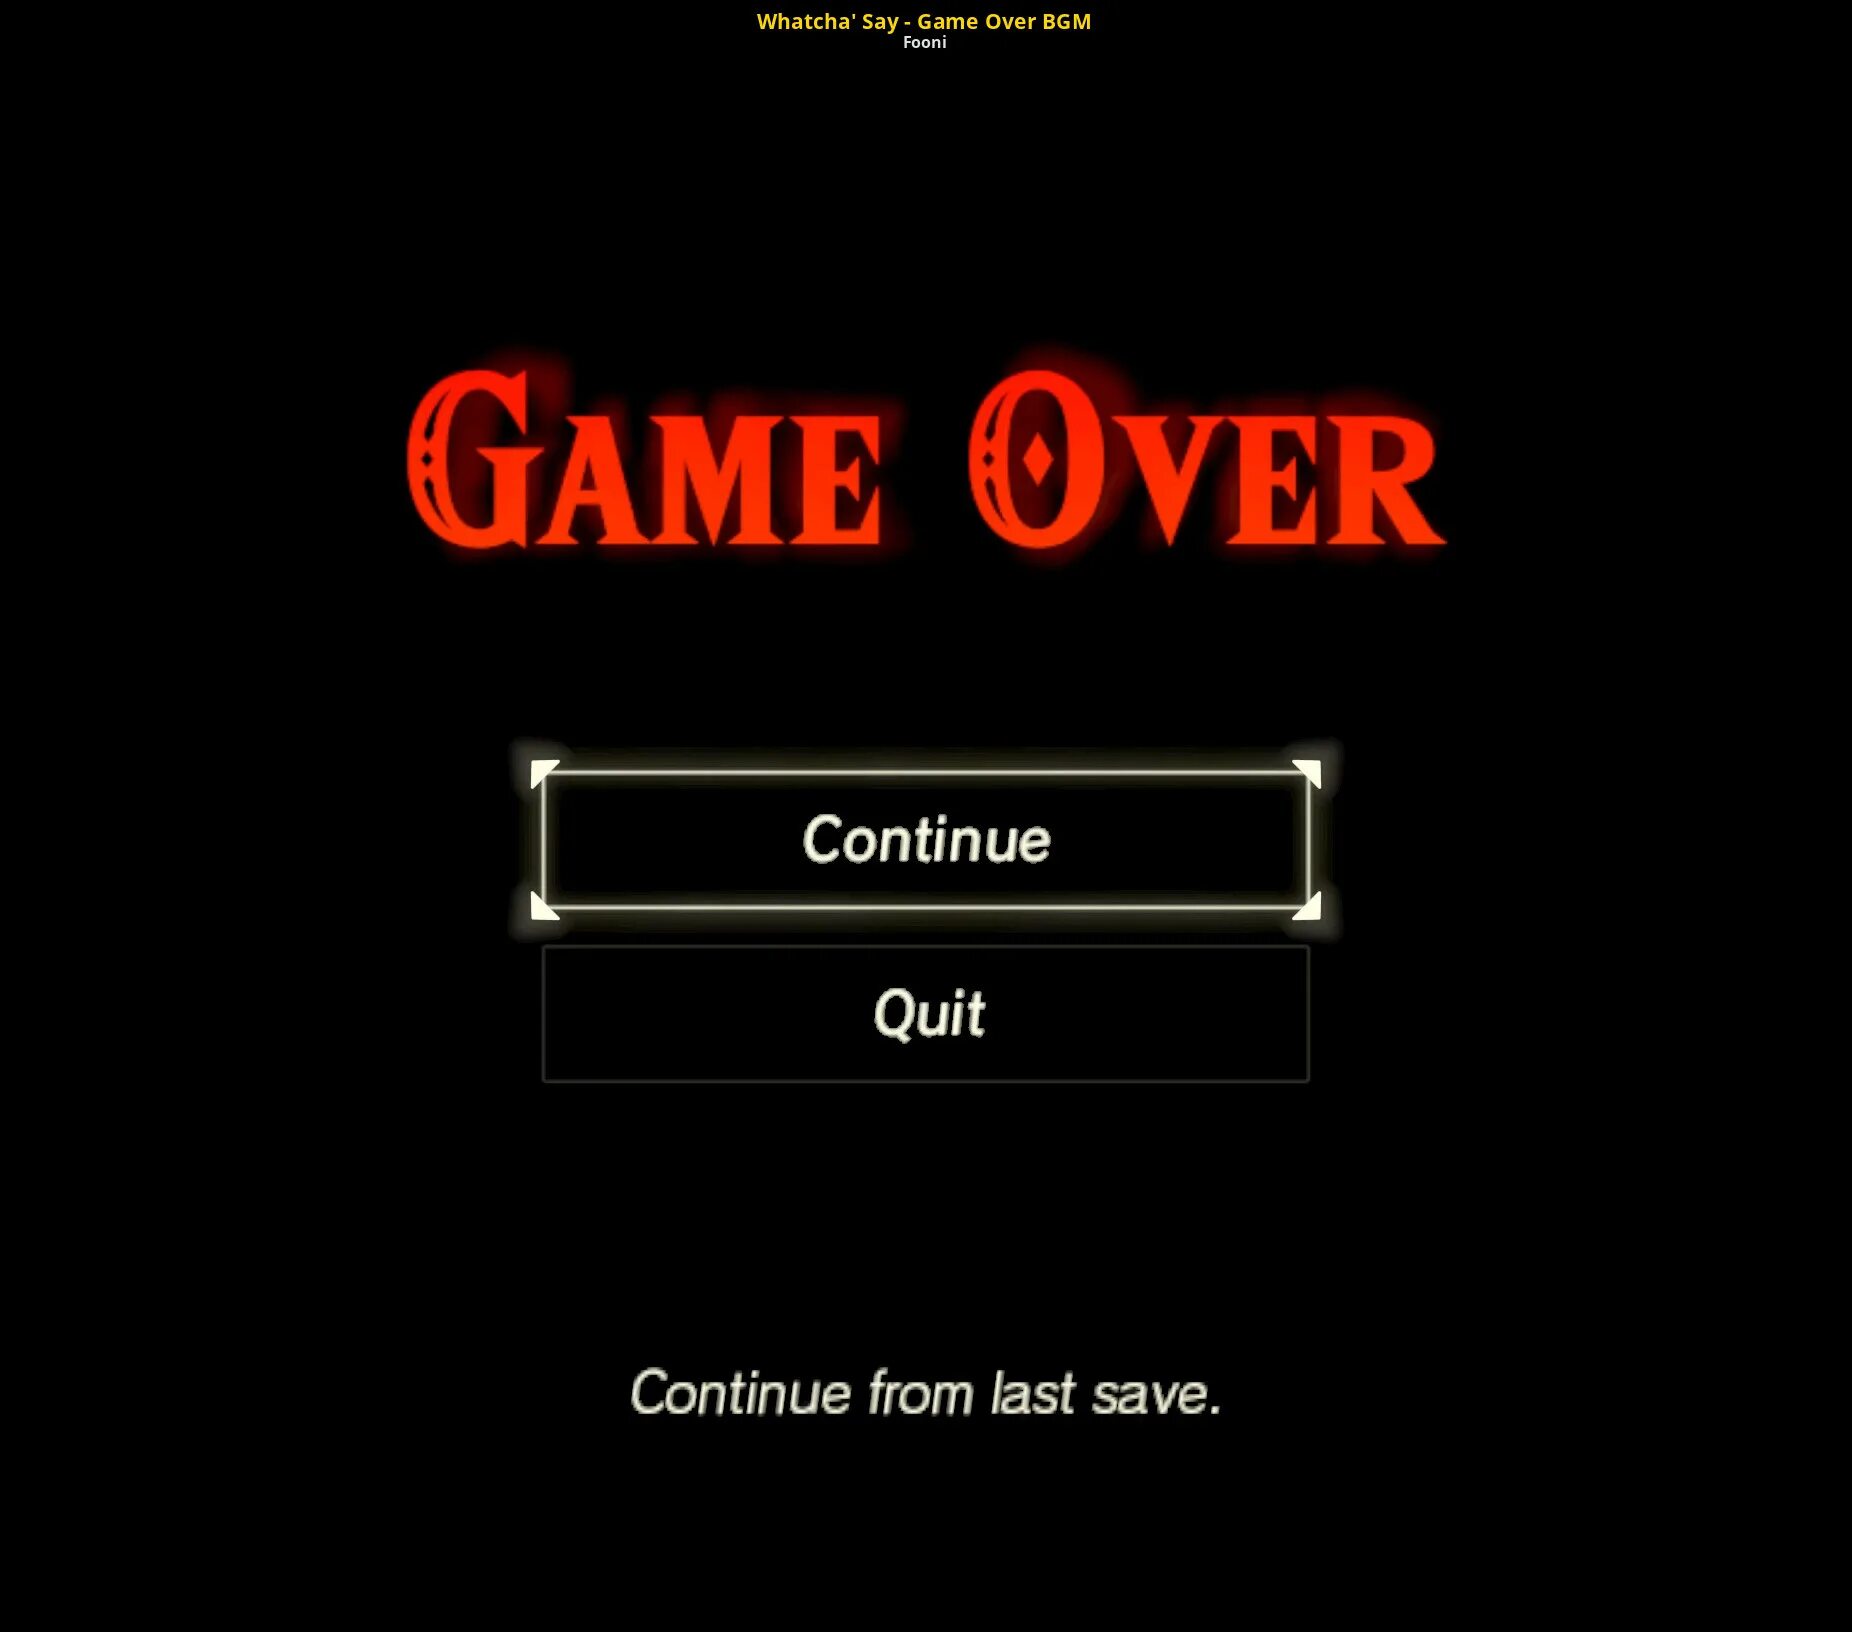 Over continue. Гейм овер Зельда. Game over. Game over в игре. Экран game over.